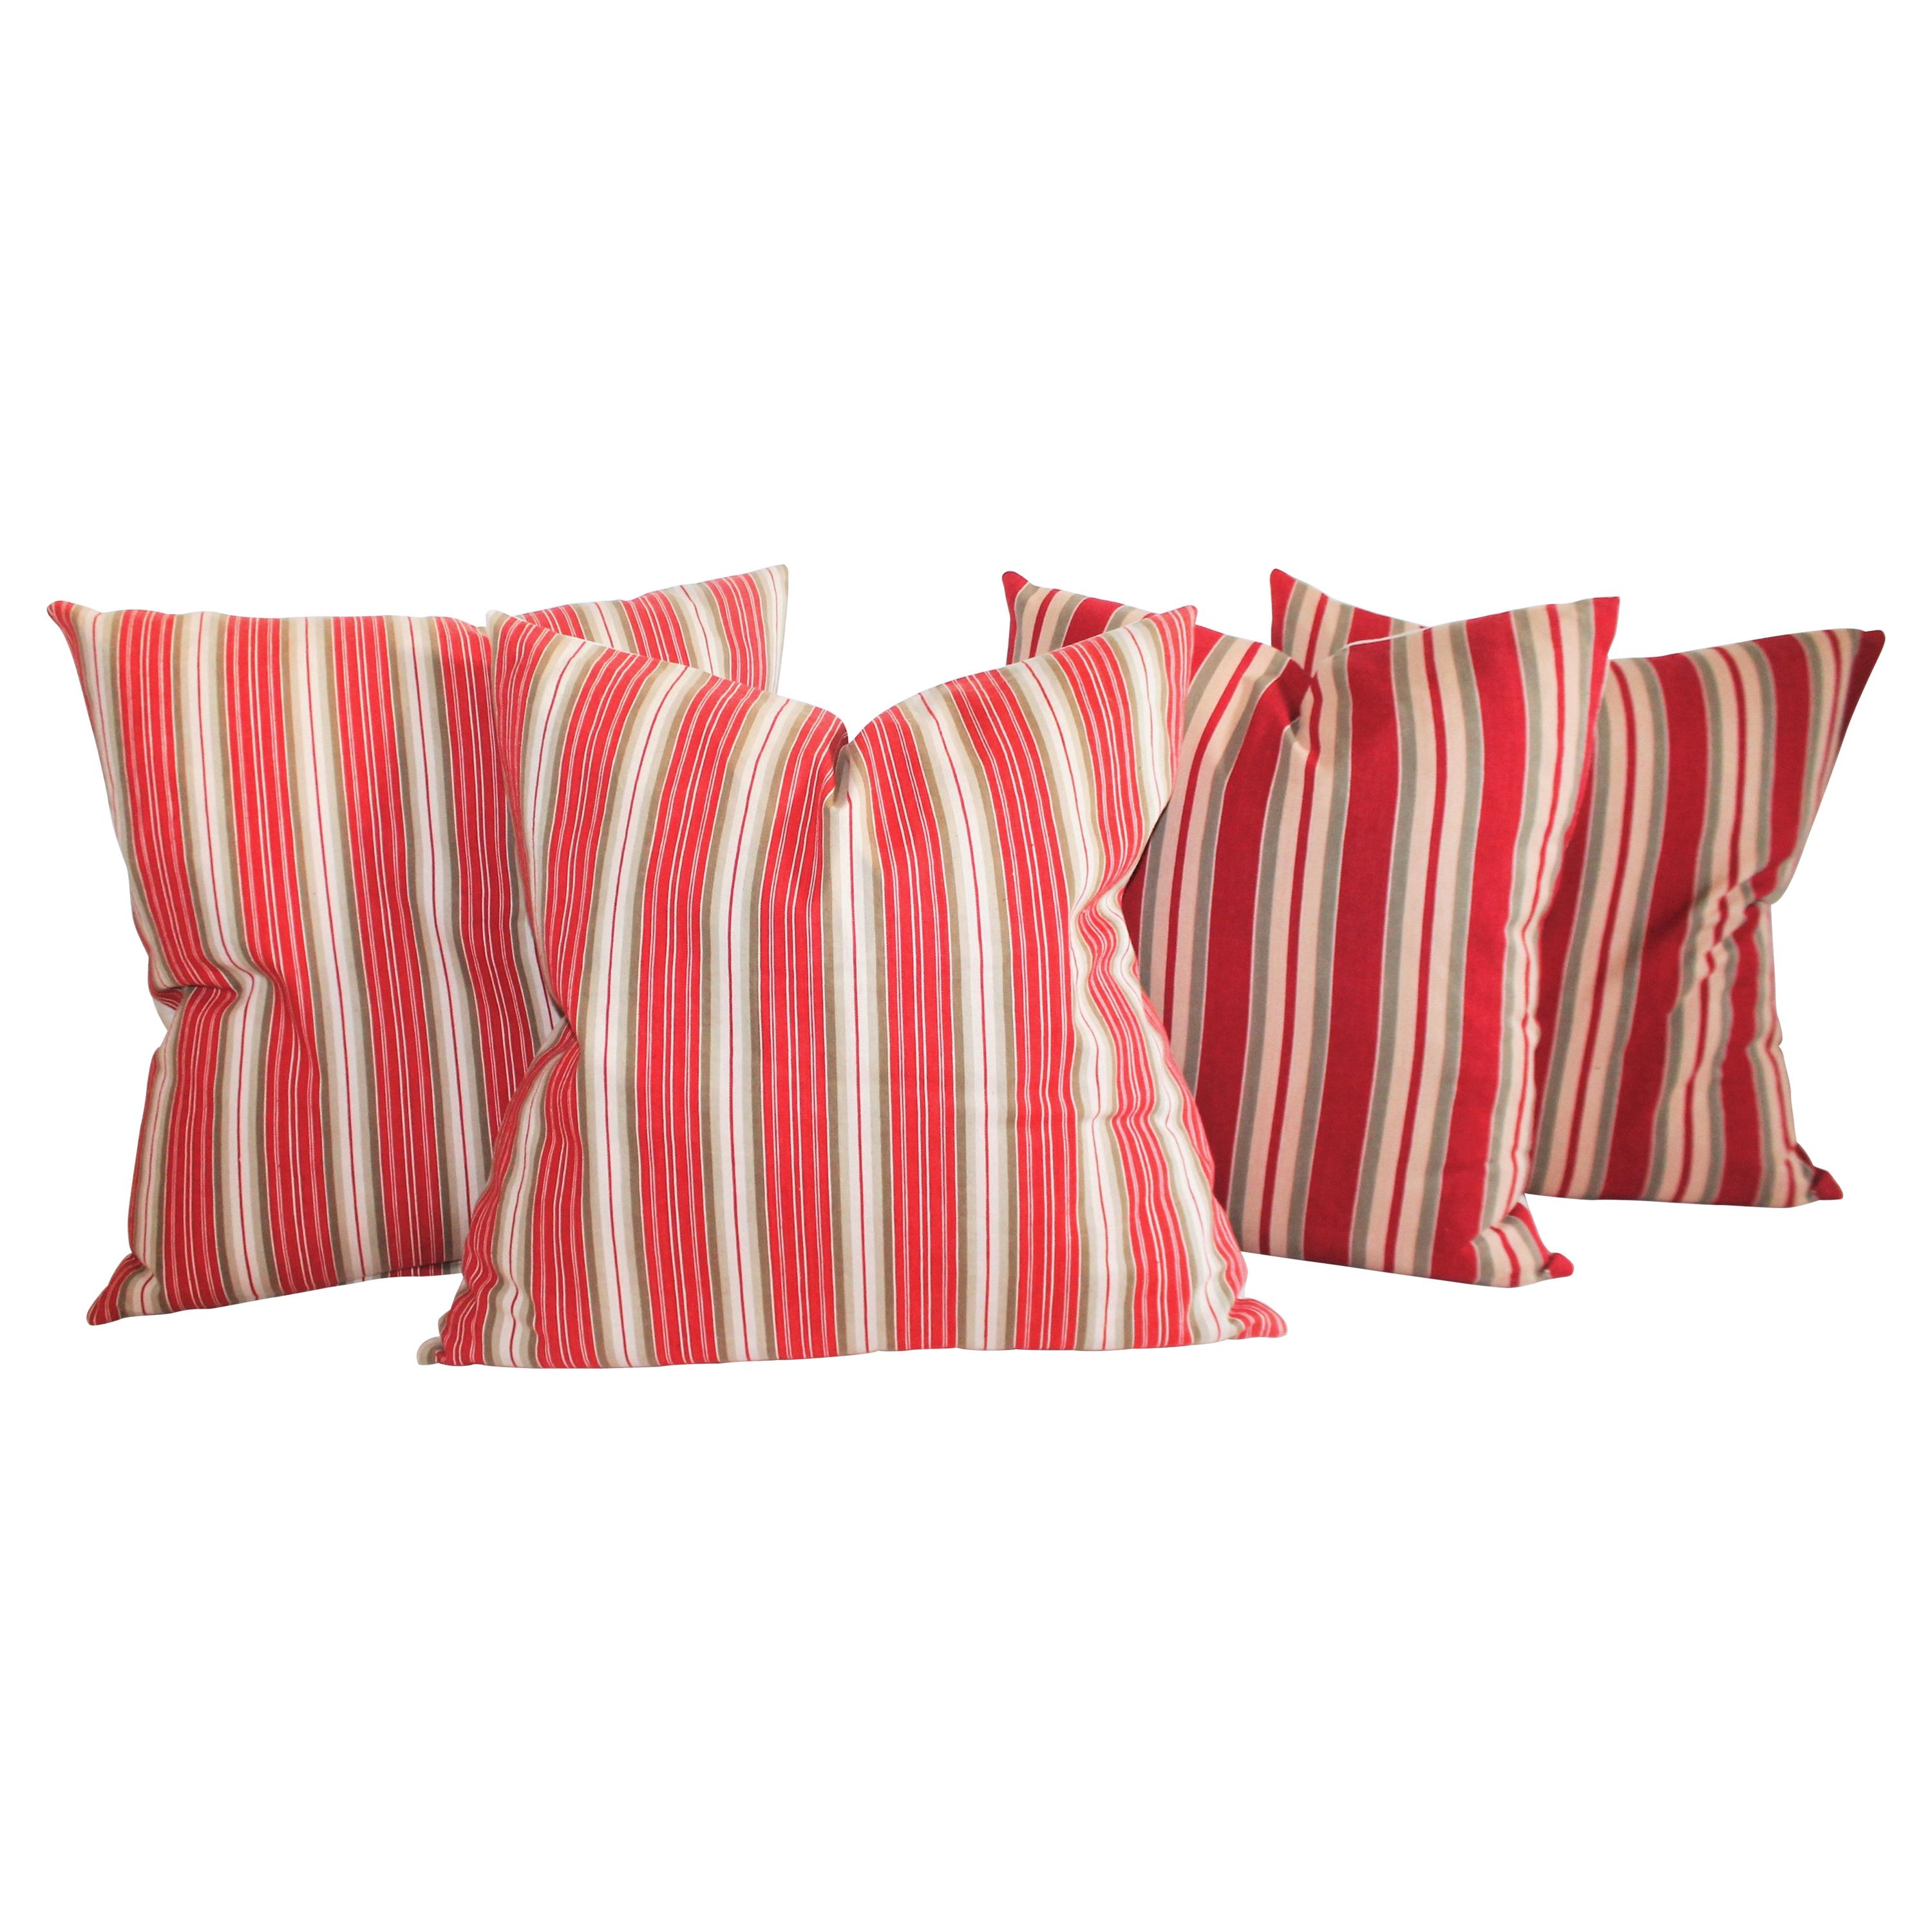 19th Century Red and Tan Striped Ticking Pillows / 2 Pairs For Sale